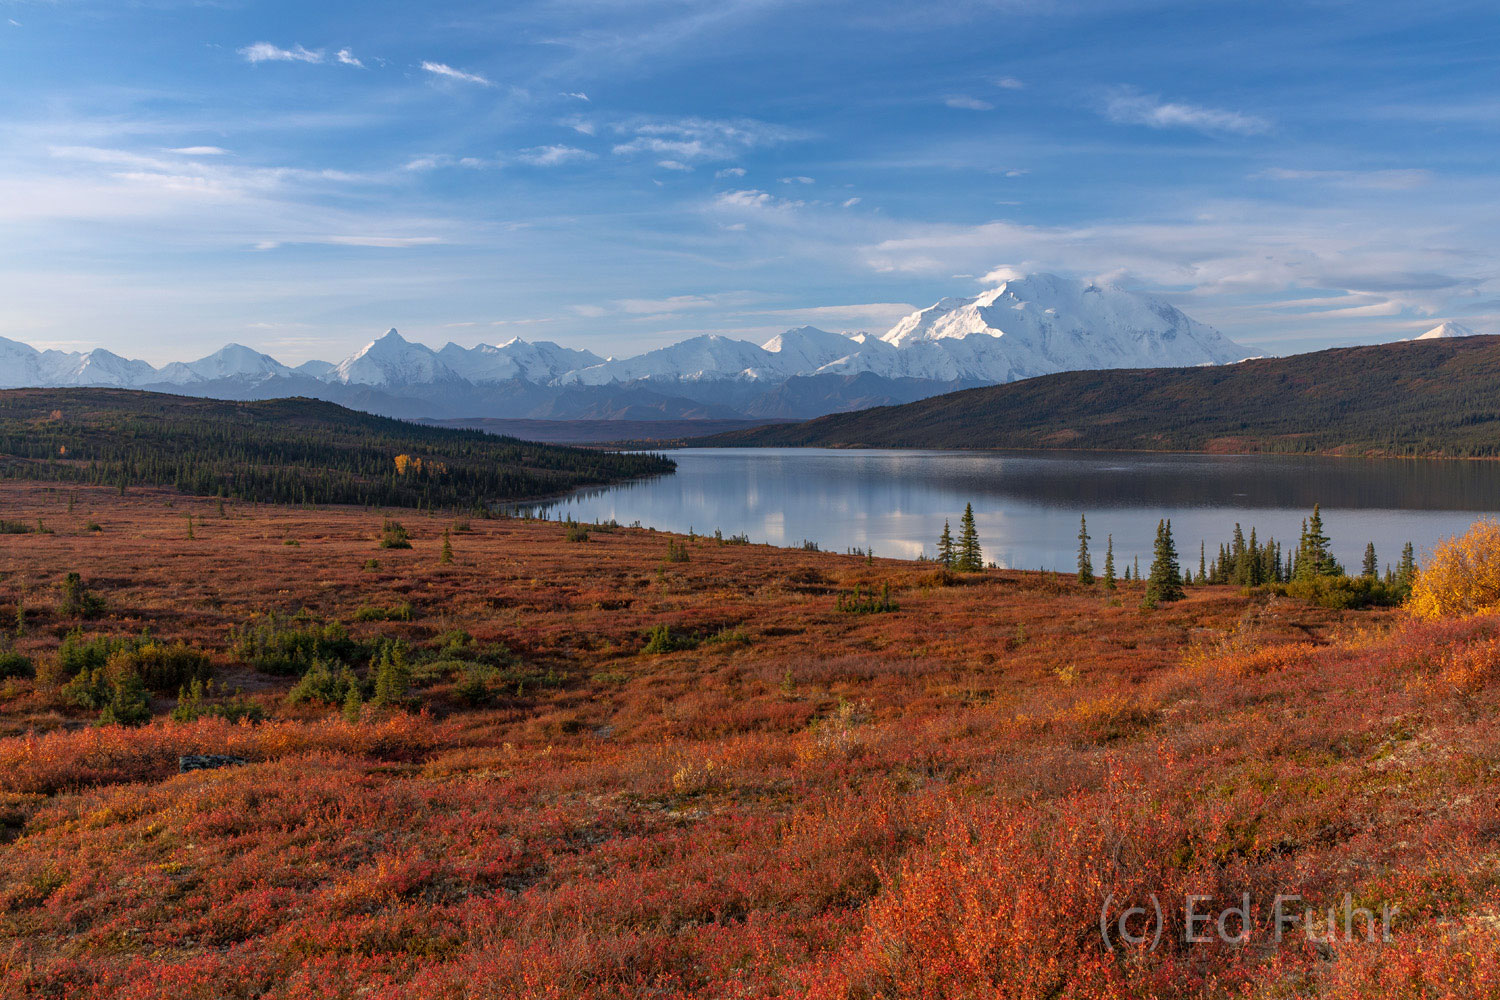 Miles of blueberry bushes carpet the shores of Wonder Lake as the Alaskan Range and Mount Denali catch the morning sun.